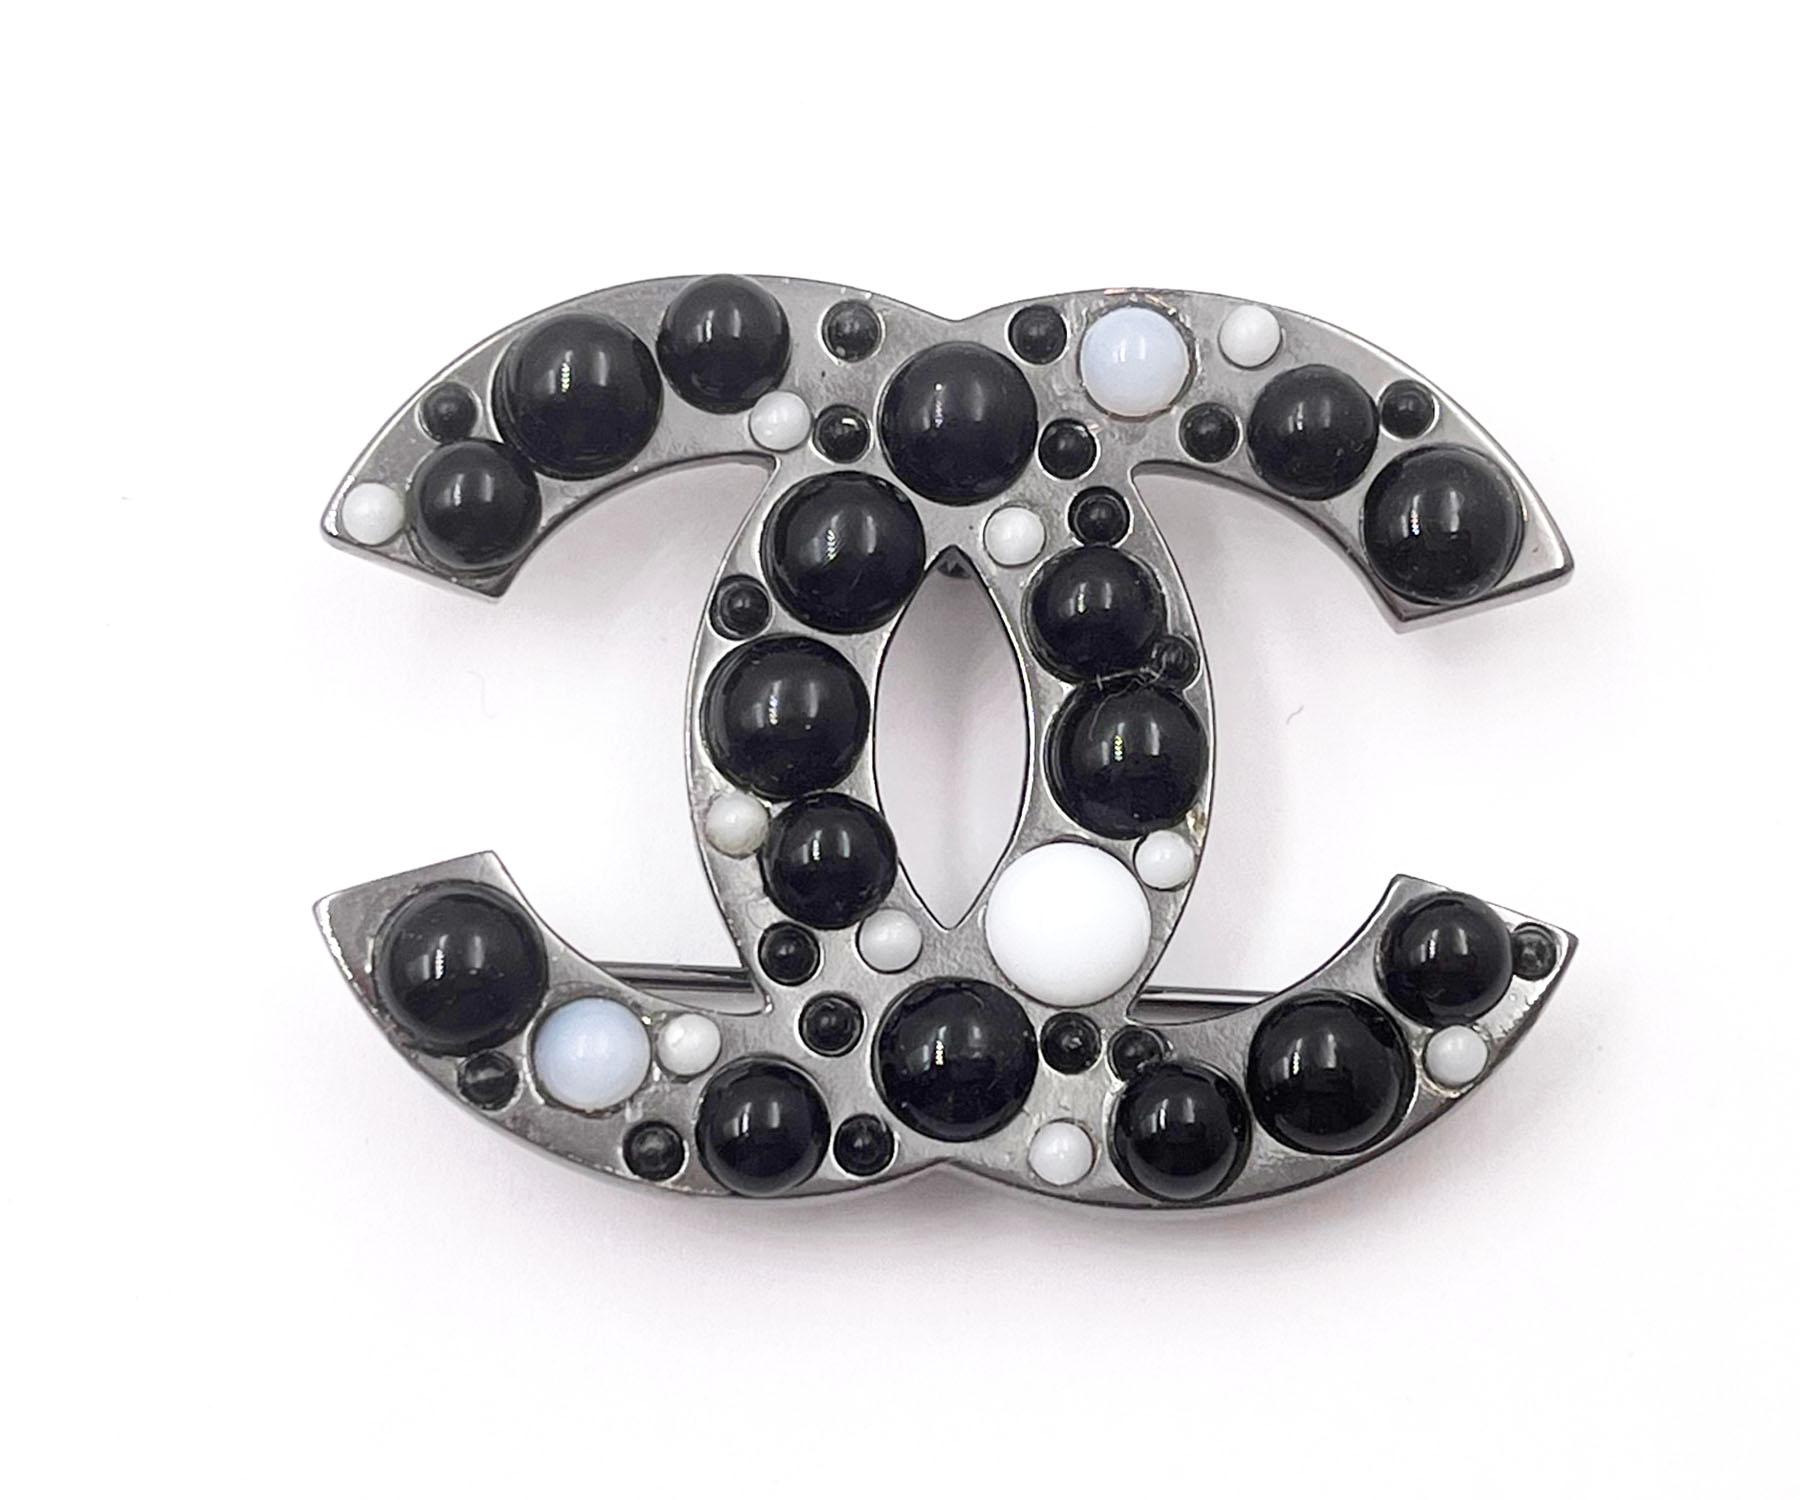 Chanel Gunmetal CC Black White Bead Brooch

* Marked 03
* Made in France

-It is approximately 1.9